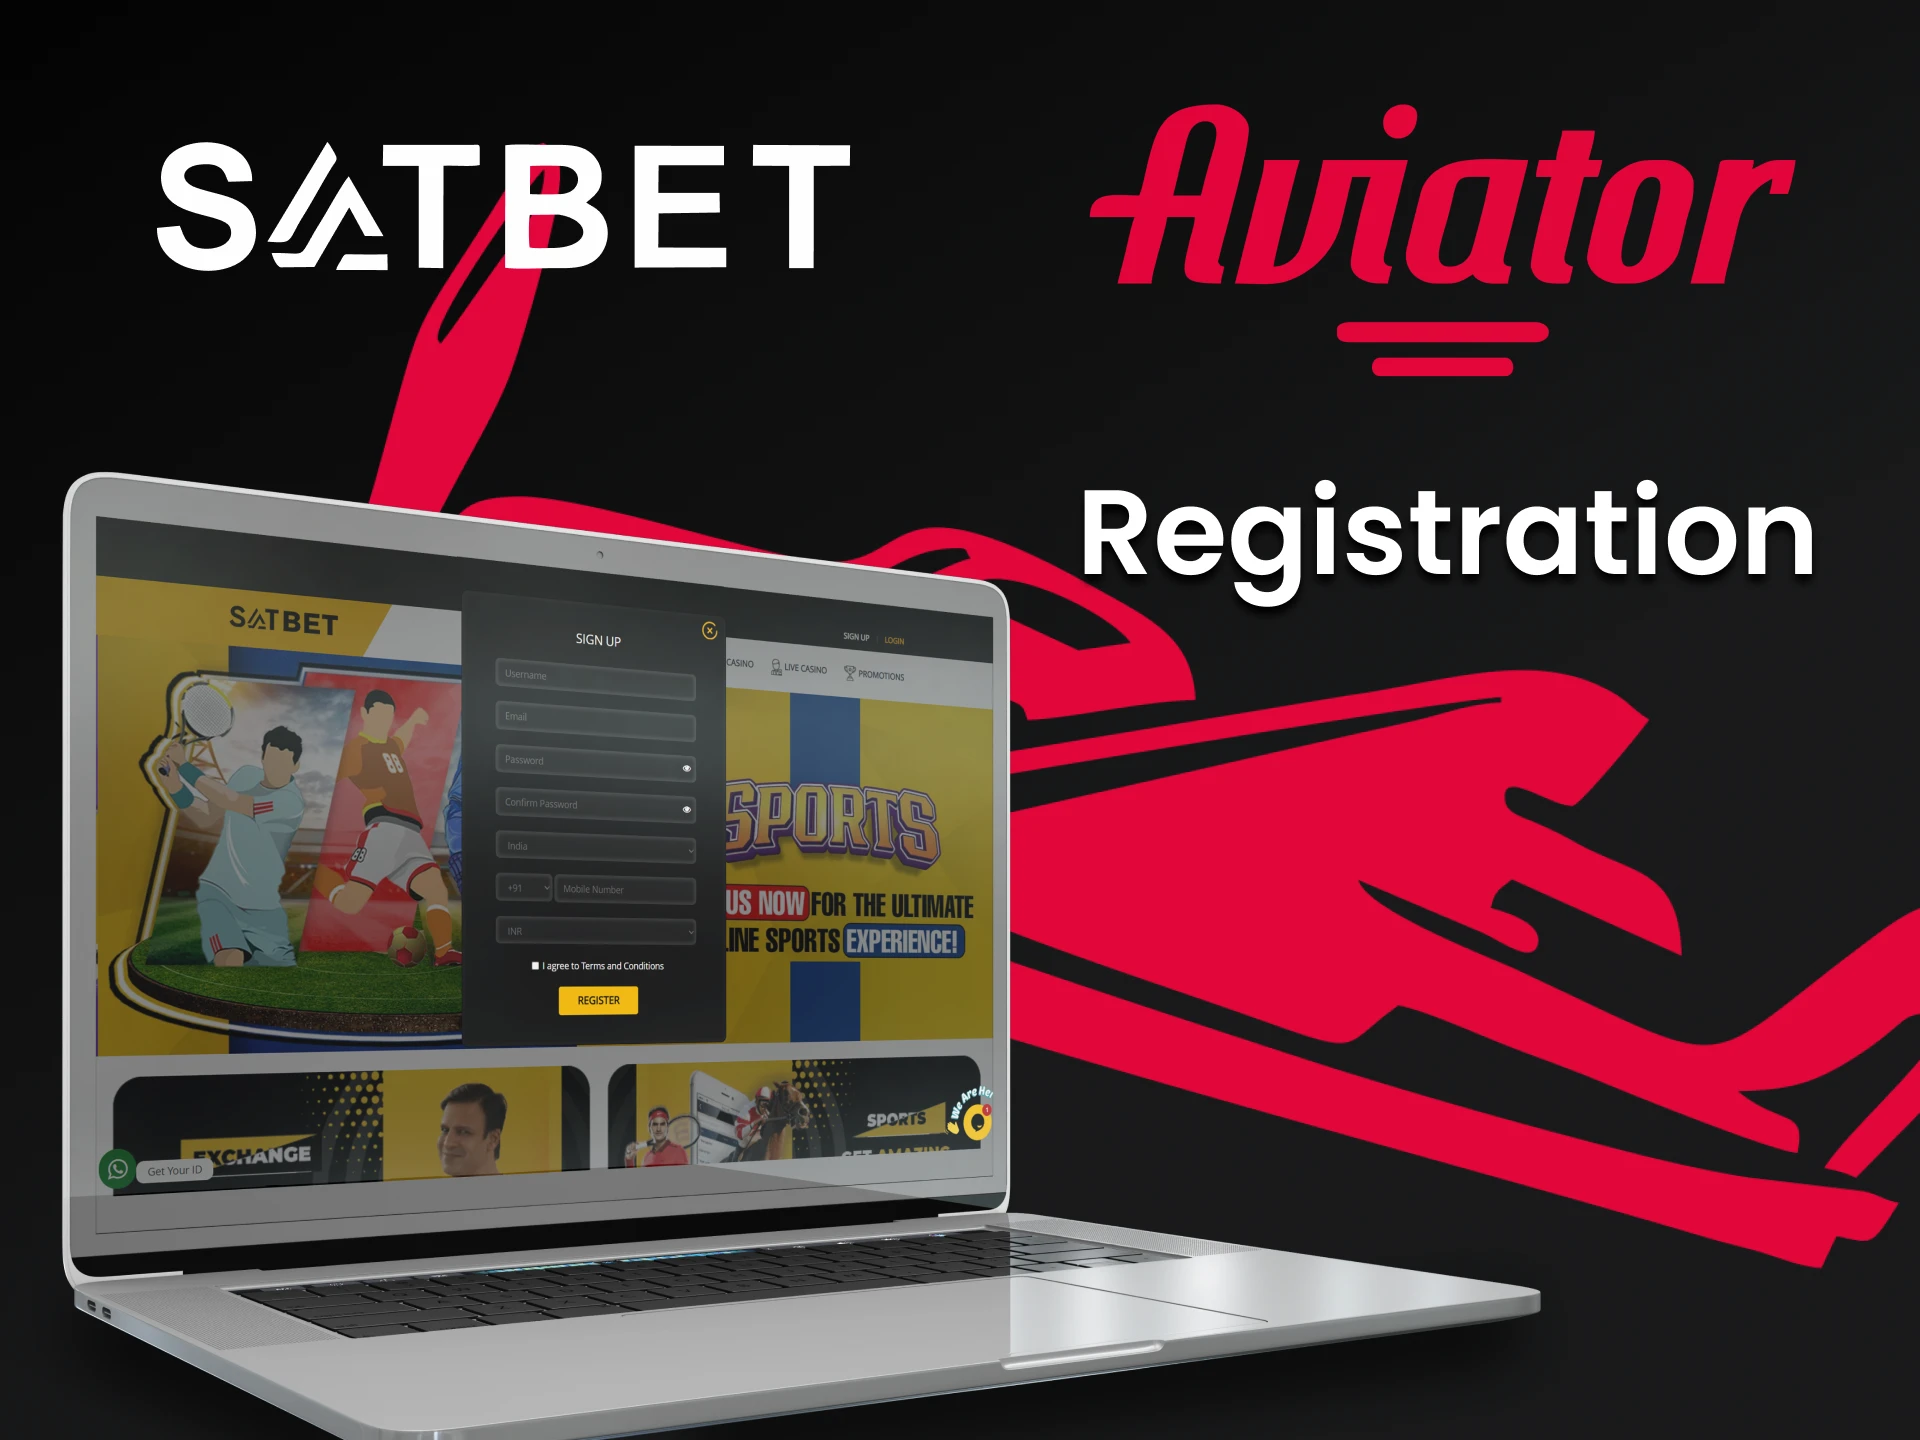 Go through the registration process on the Satbet website to play Aviator.